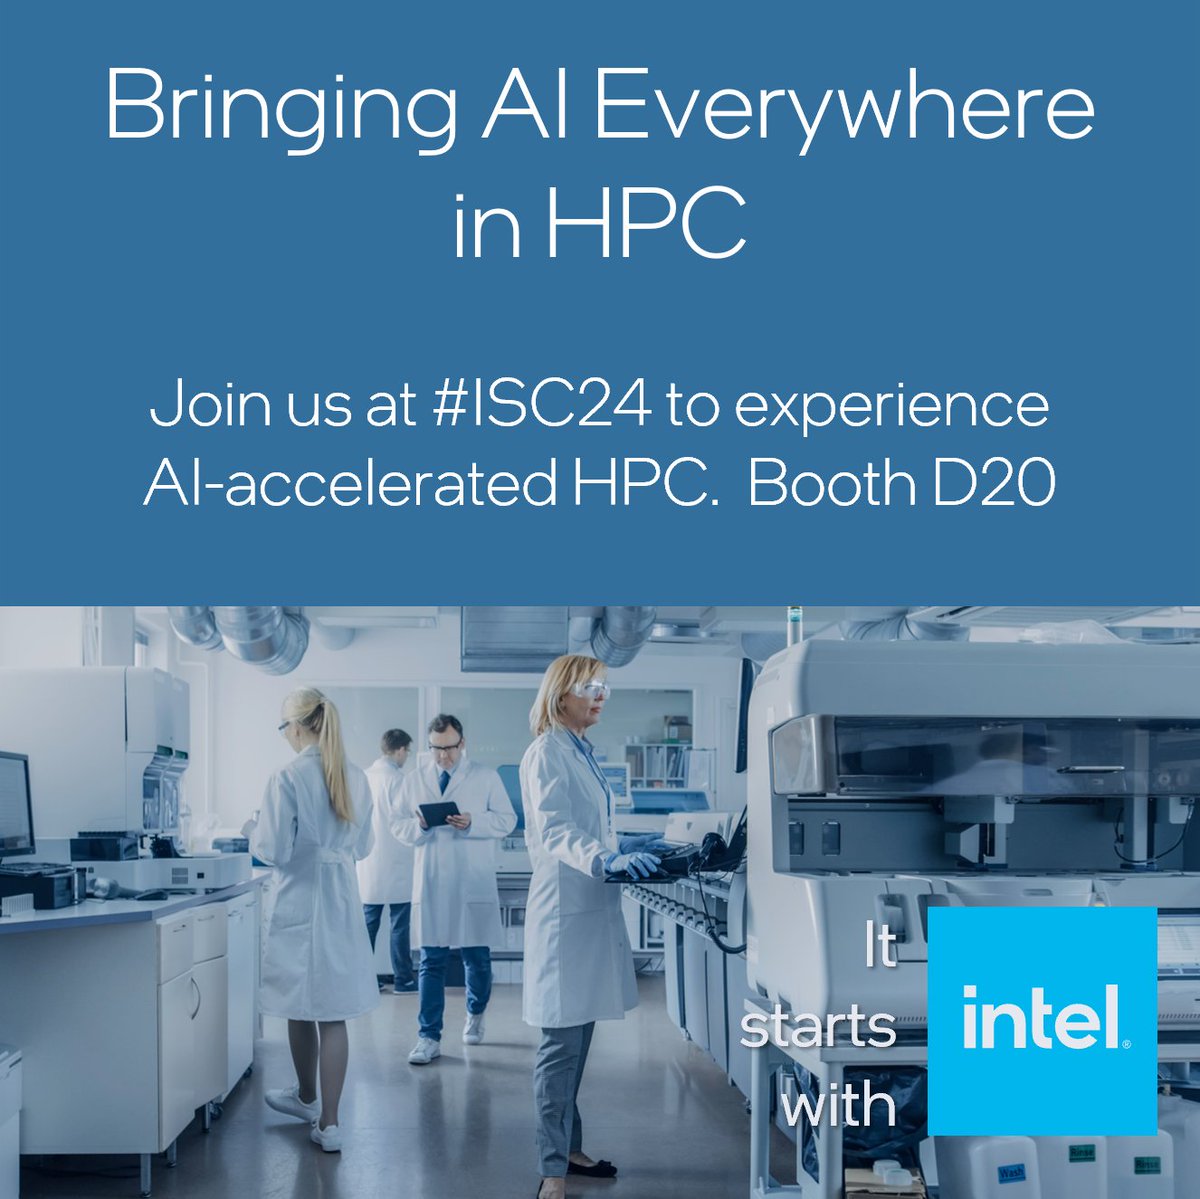 Meet the experts, experience #HPC and #AI demos, and accelerate your scientific innovations at #ISC24. Visit the #Intel booth (D20) and be sure to join the Innovation Pass for a chance to win. Learn more: intel.com/ISC